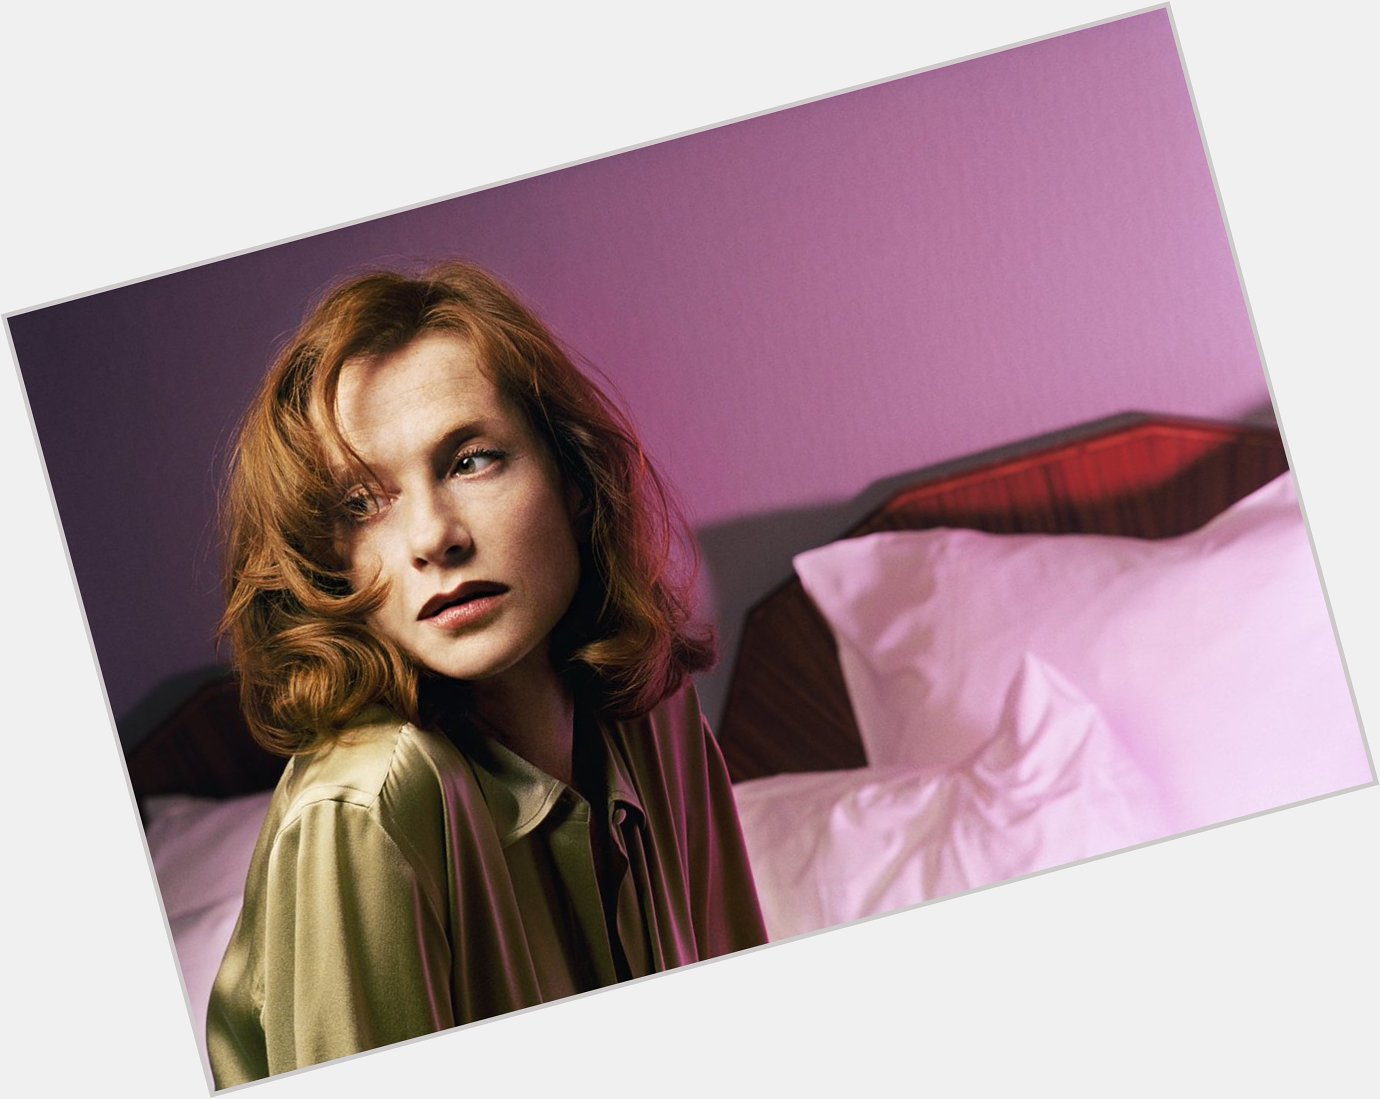 Happy Birthday, Isabelle Huppert! Born 16 March 1953 in Paris, France 